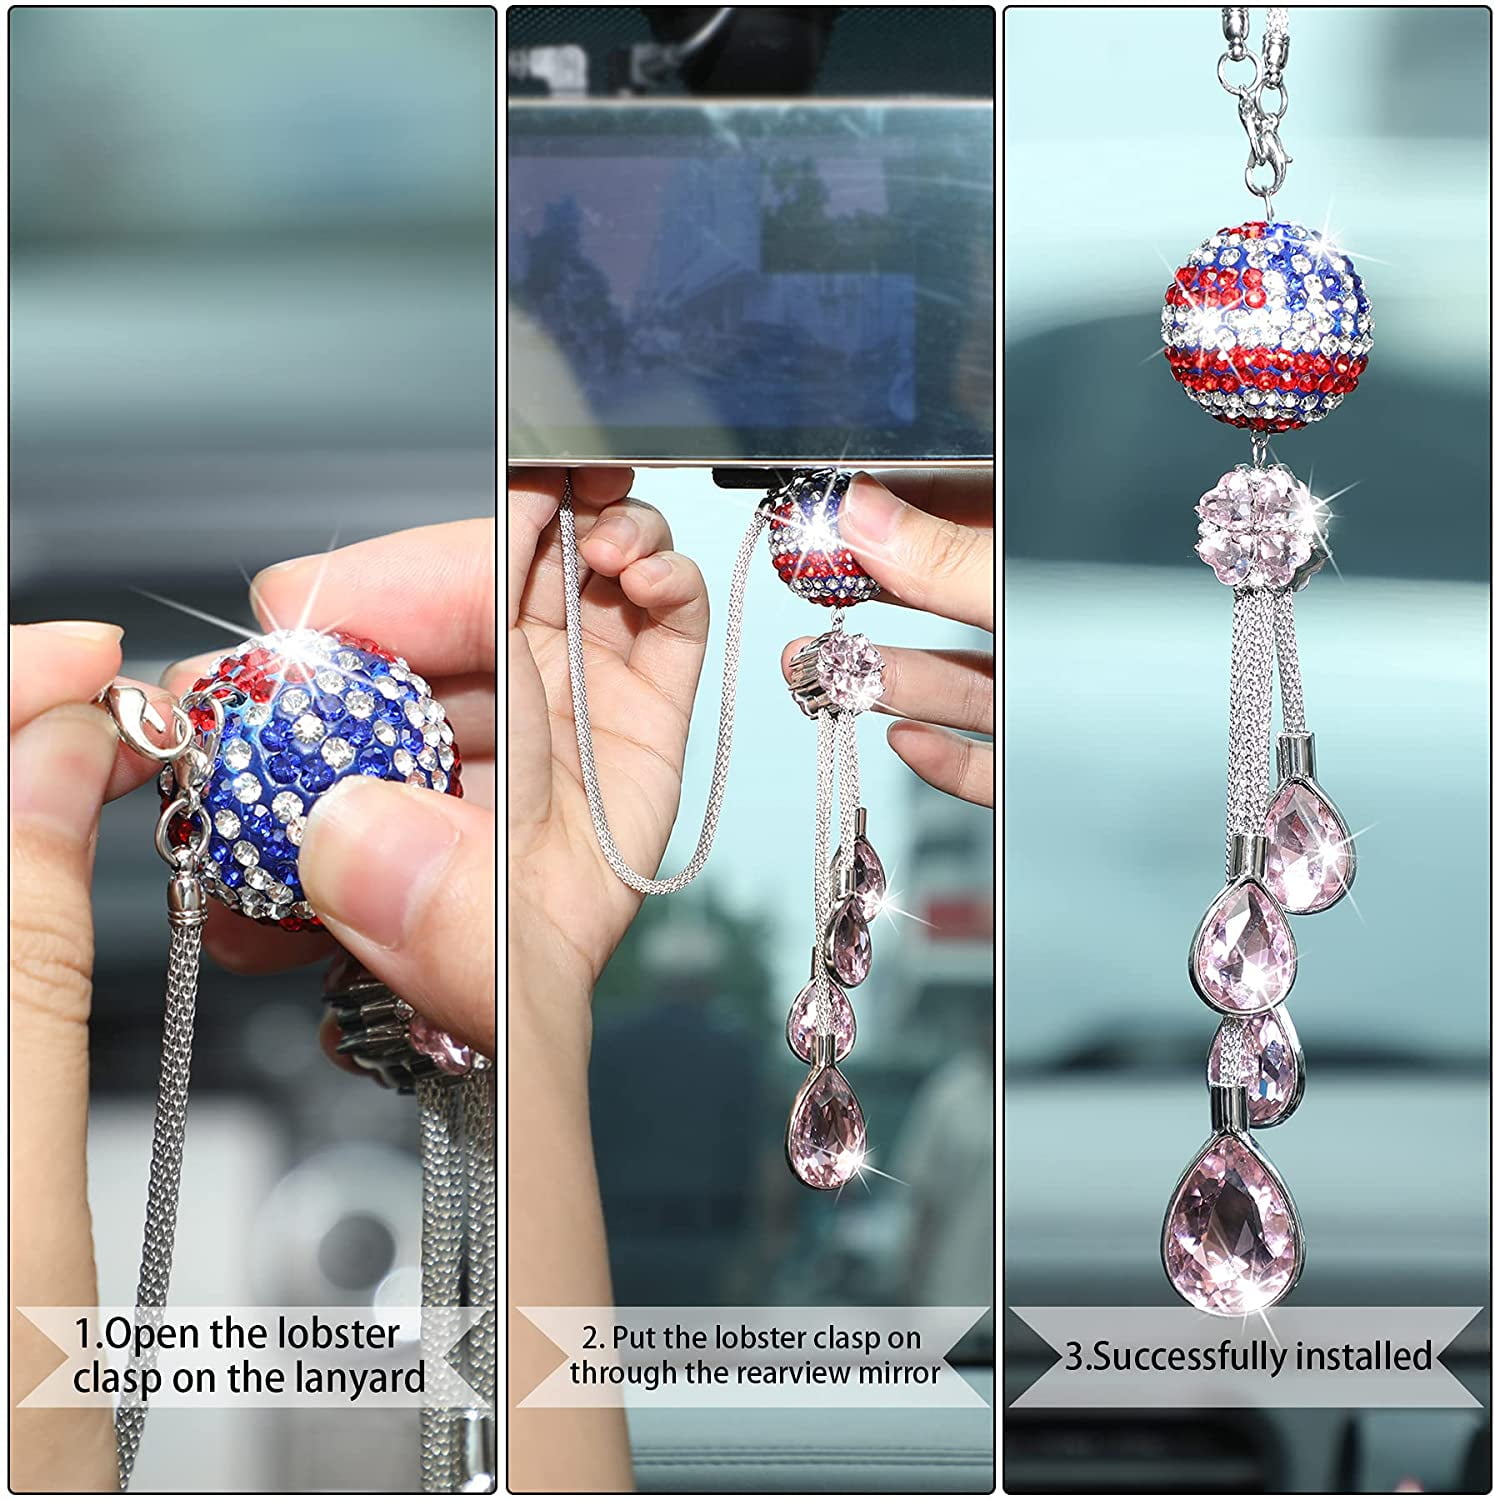 NOVWANG Bling Car View Mirror Hanging Accessories for Women Independence Day Car Decor Patriotic American Flag Crystall Charms Rhinestone Pendant 